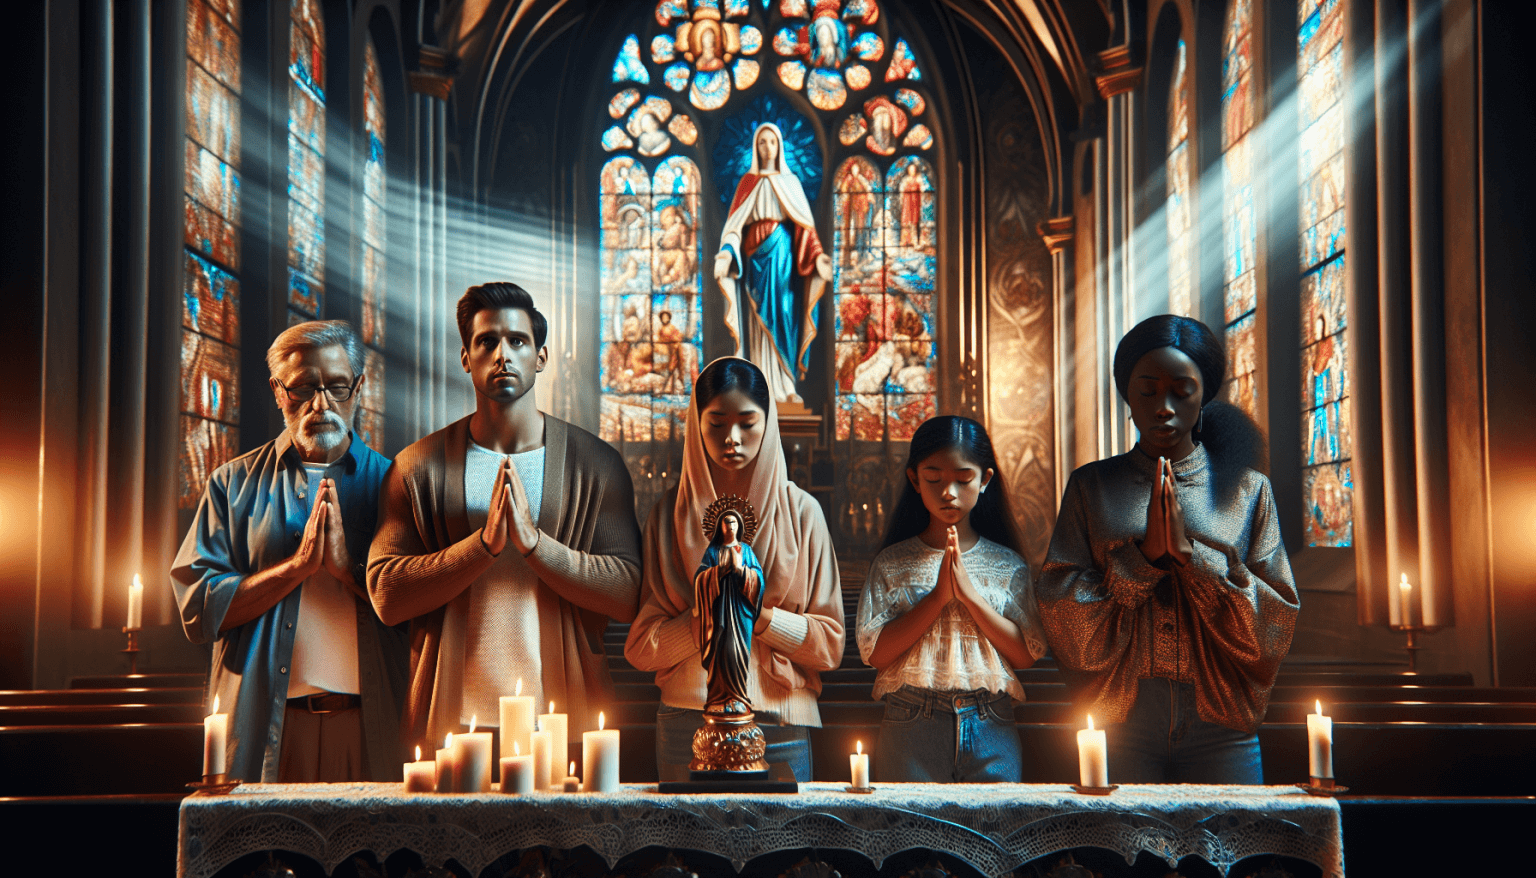 An artistically rich and spiritual illustration of a diverse group of people of various ages and ethnicities gathered in a serene, candle-lit church, praying together in front of a beautifully detaile